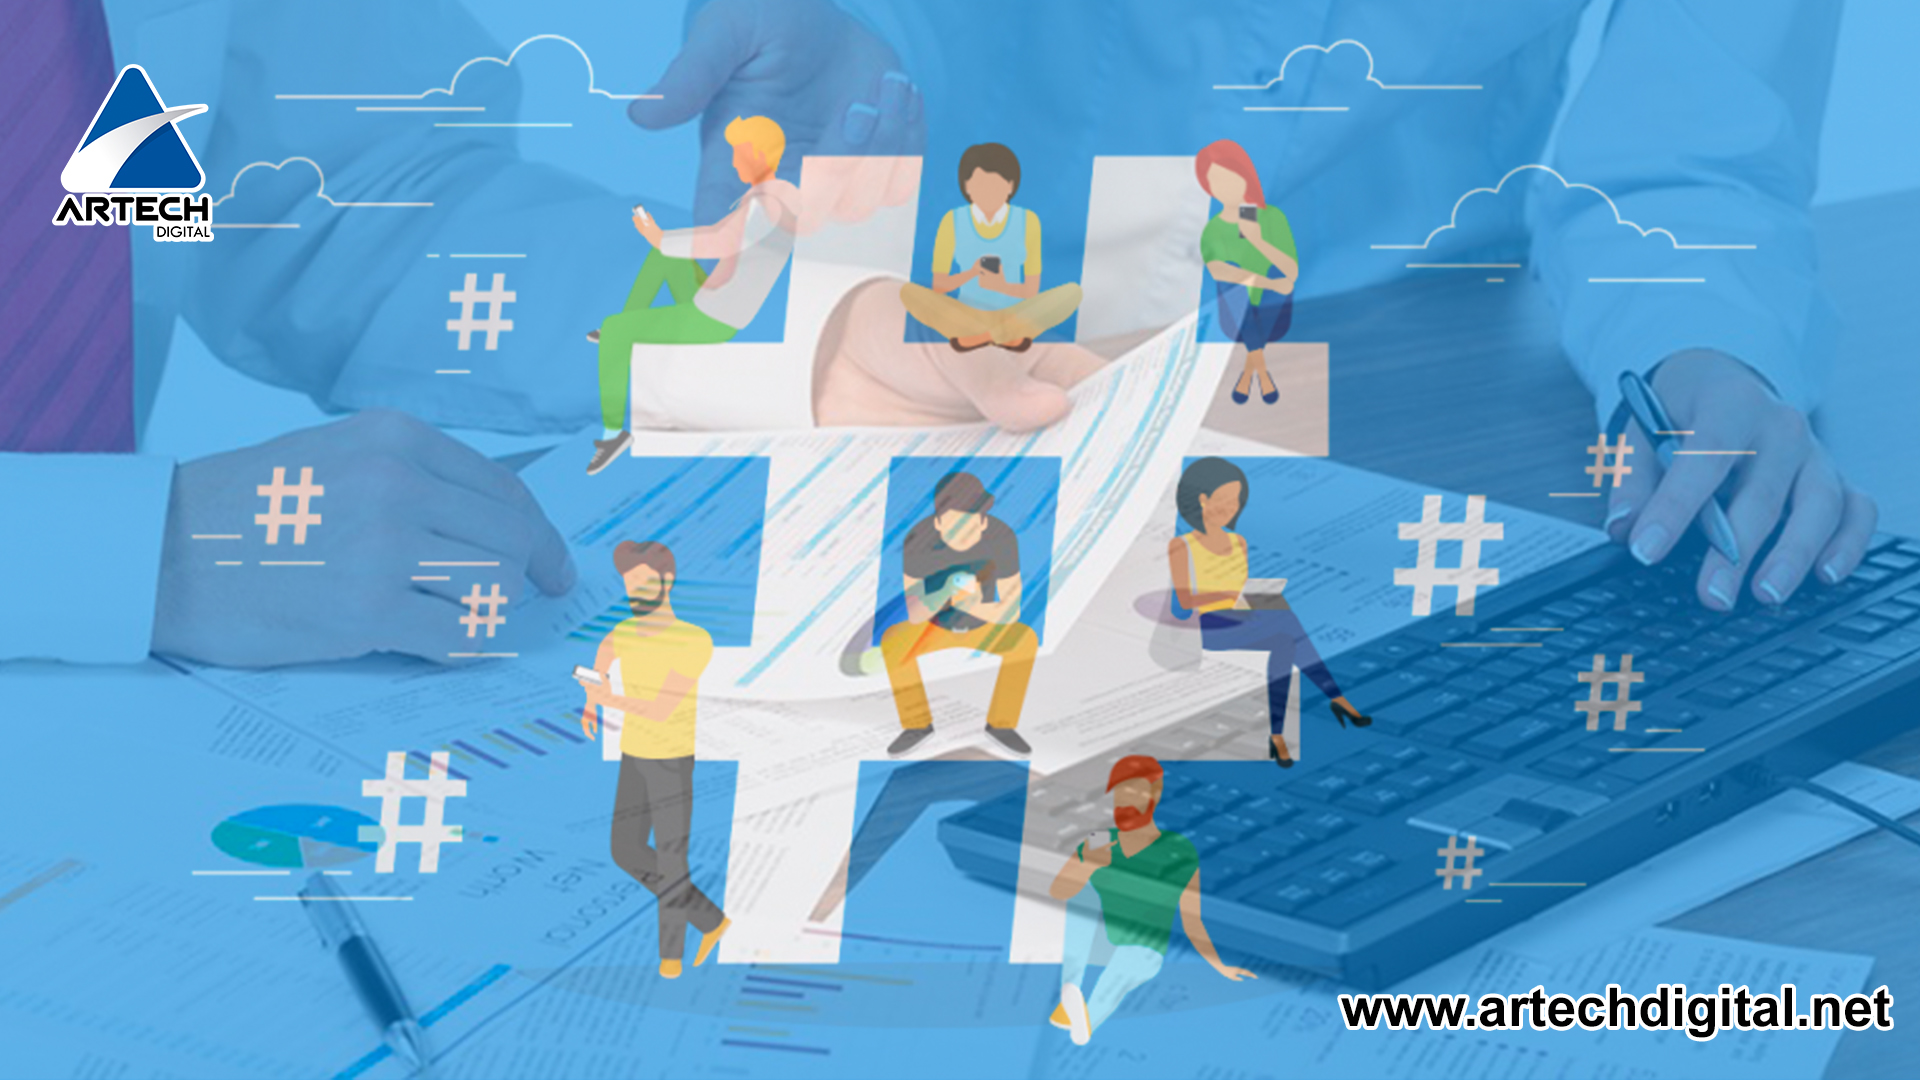 Hashtag on Social Networks improves your marketing strategy